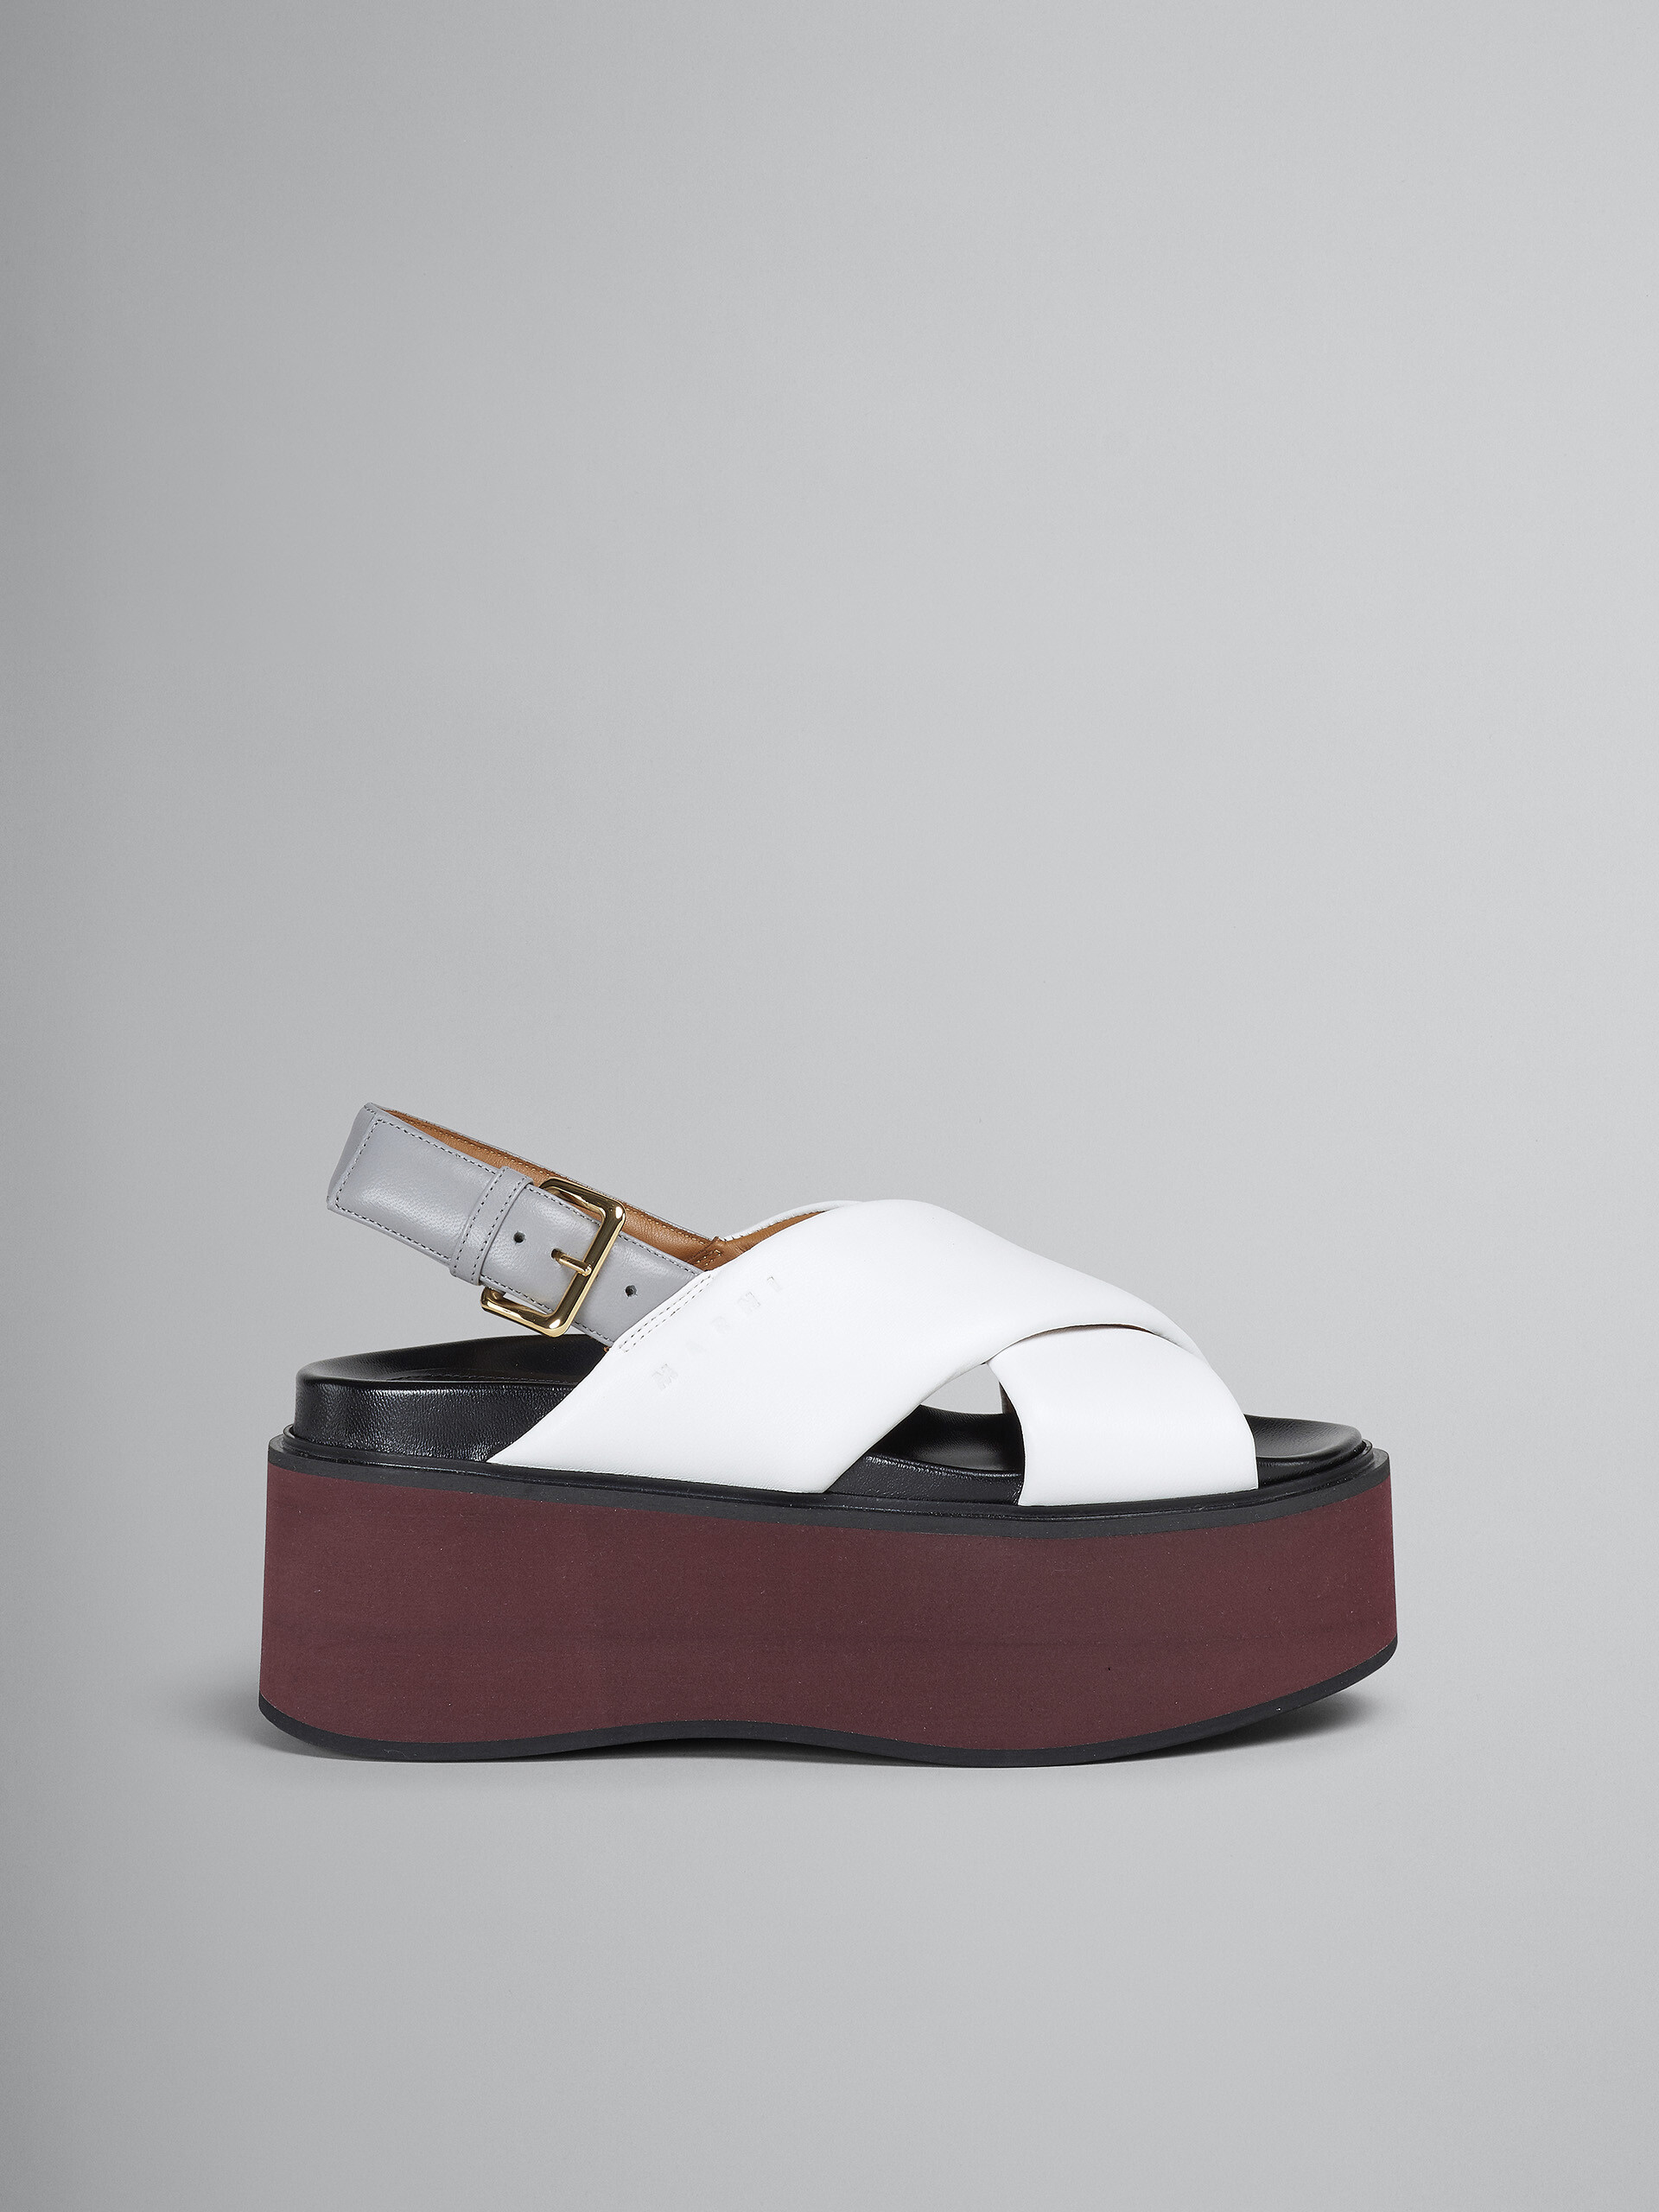 White and grey leather wedge - Sandals - Image 1